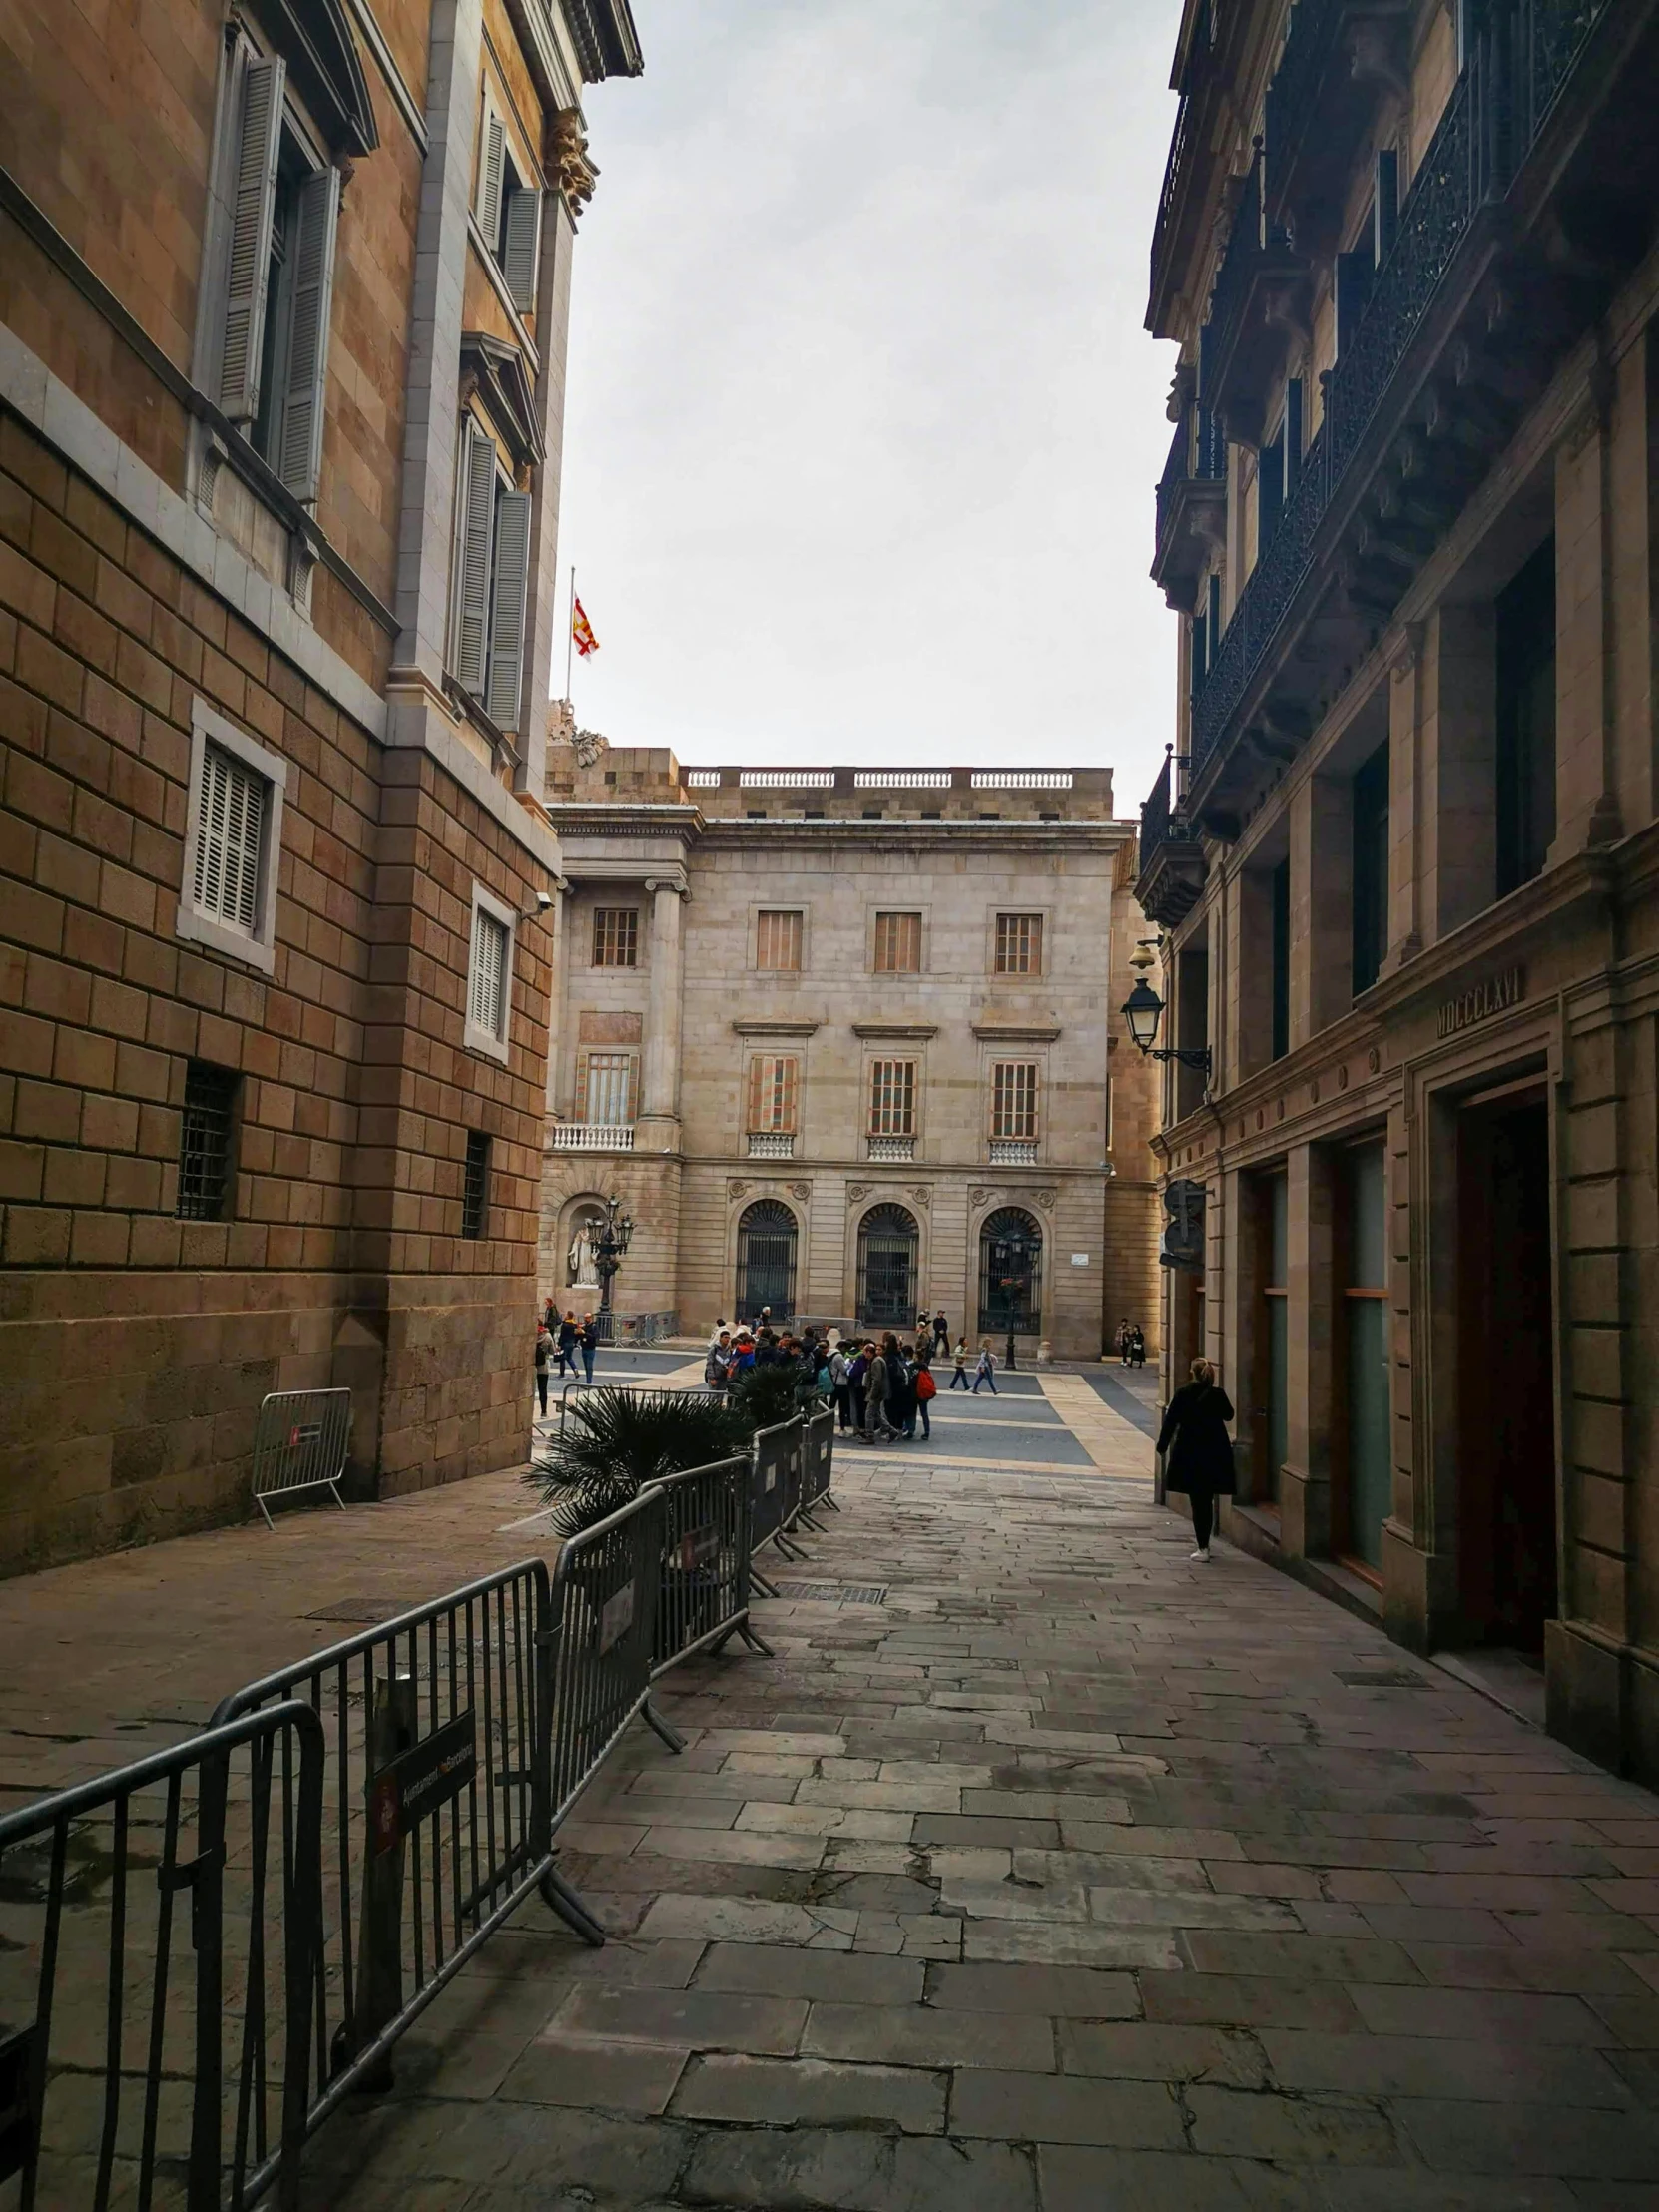 a group of people walking down a street next to tall buildings, a picture, renaissance, monserrat gudiol, old library, instagram picture, slight overcast